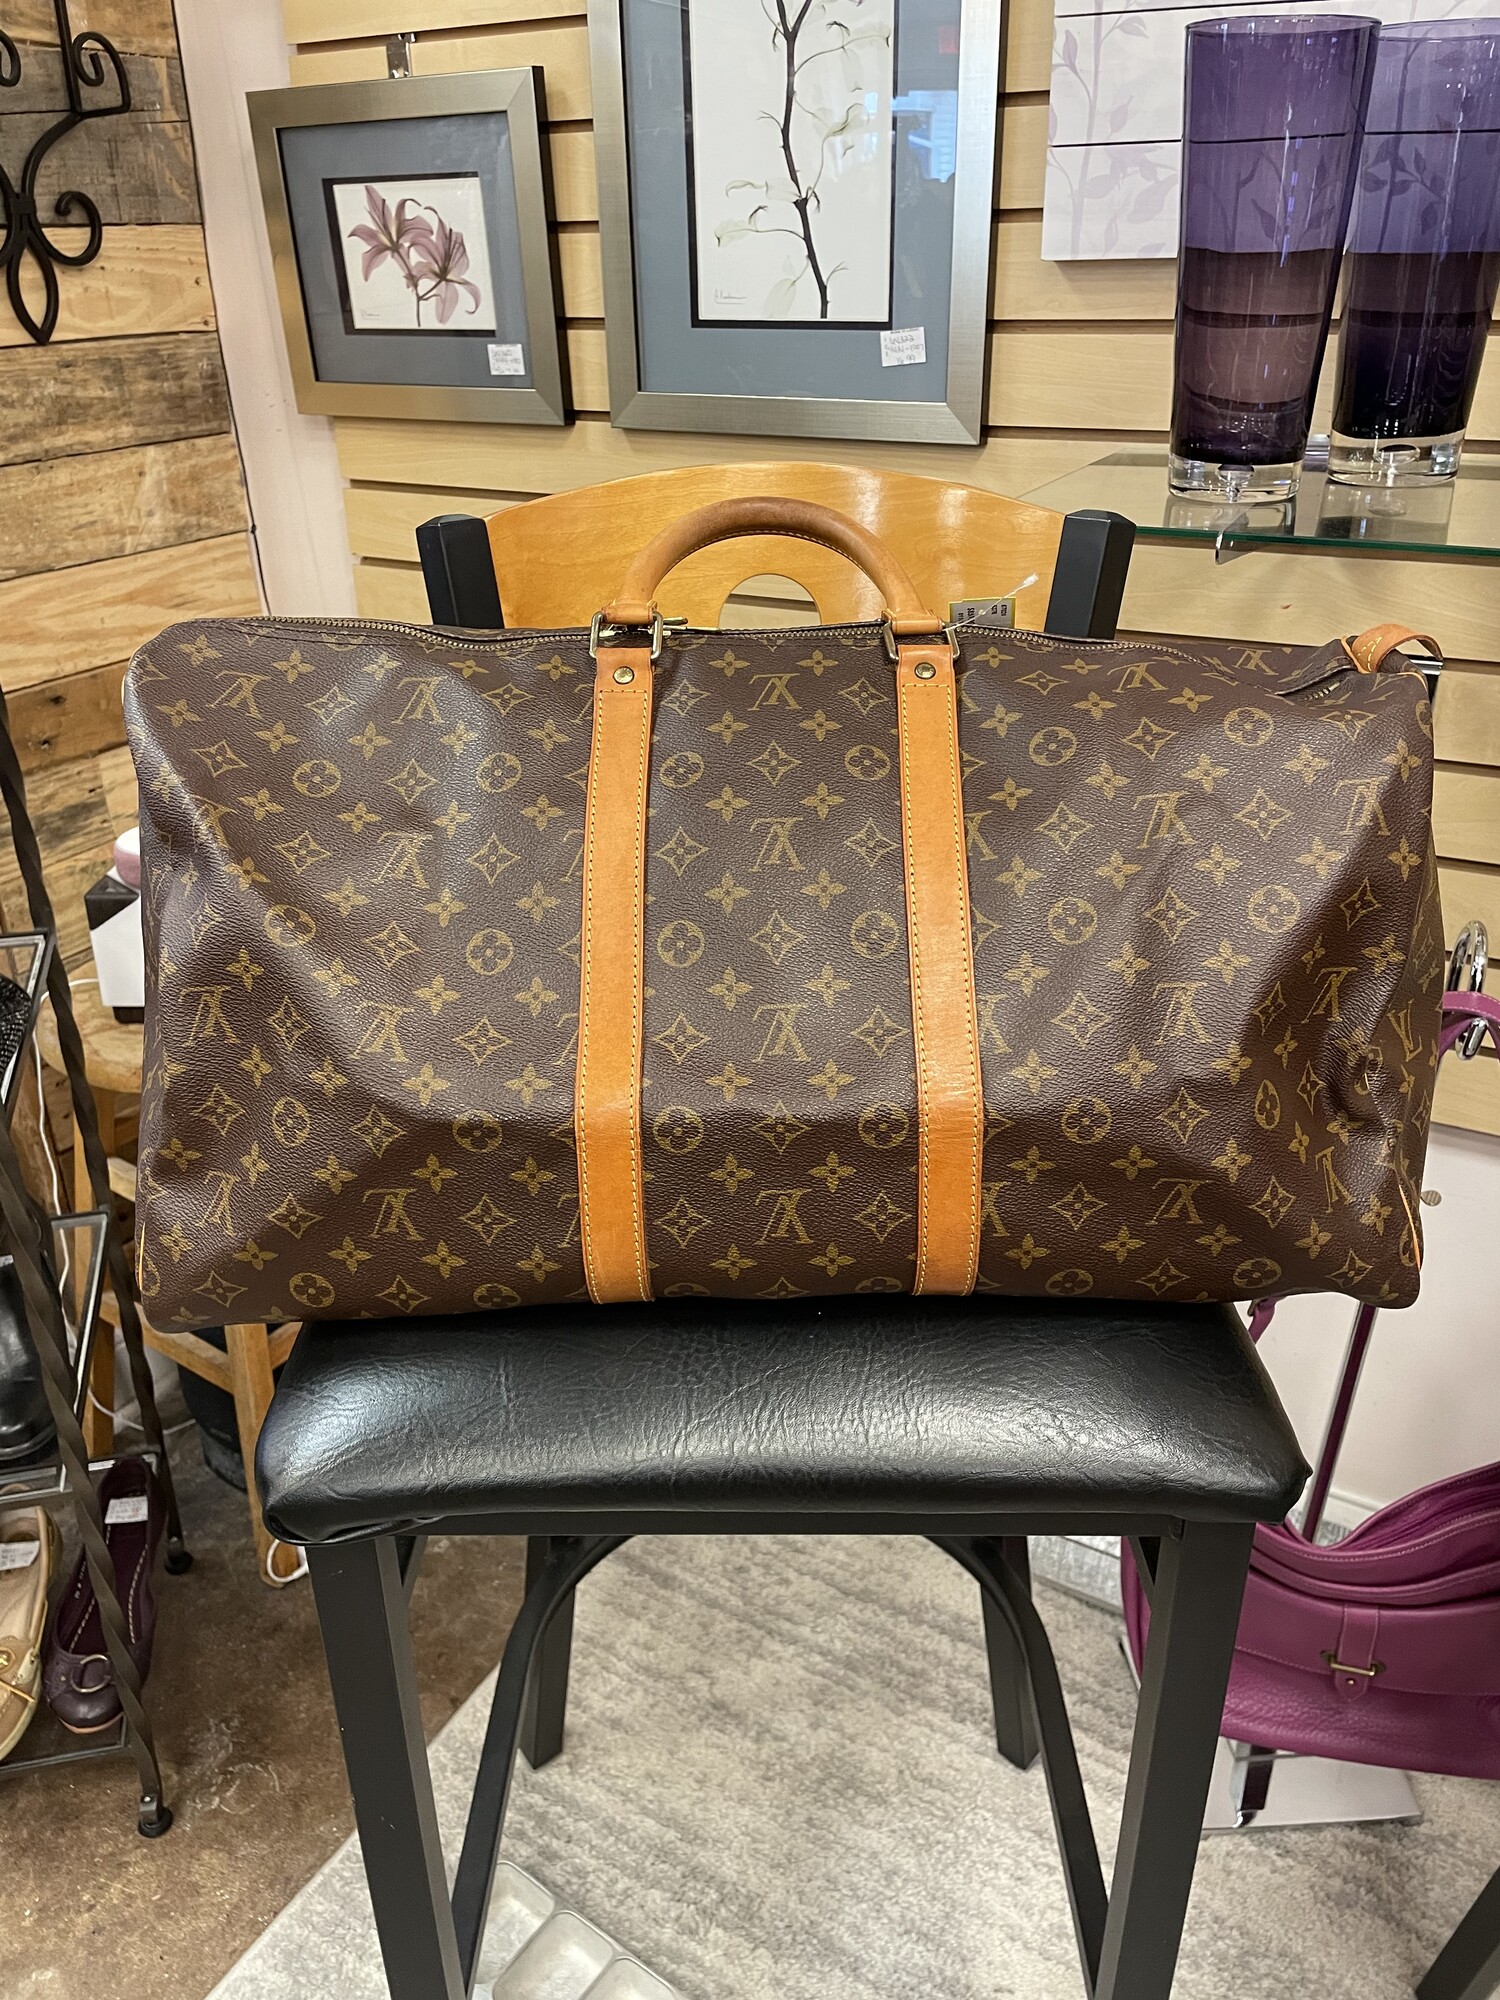 LV Keepall 55, Brown, Size: As Is,  Monogram Keepall 55 Monogram, Some staining on one of the straps on the bottom, Unisex Bag,  Hardware is a Gold Closure.

12.2'' x 21.65'' x 9.84''
Handle Length 11.41''